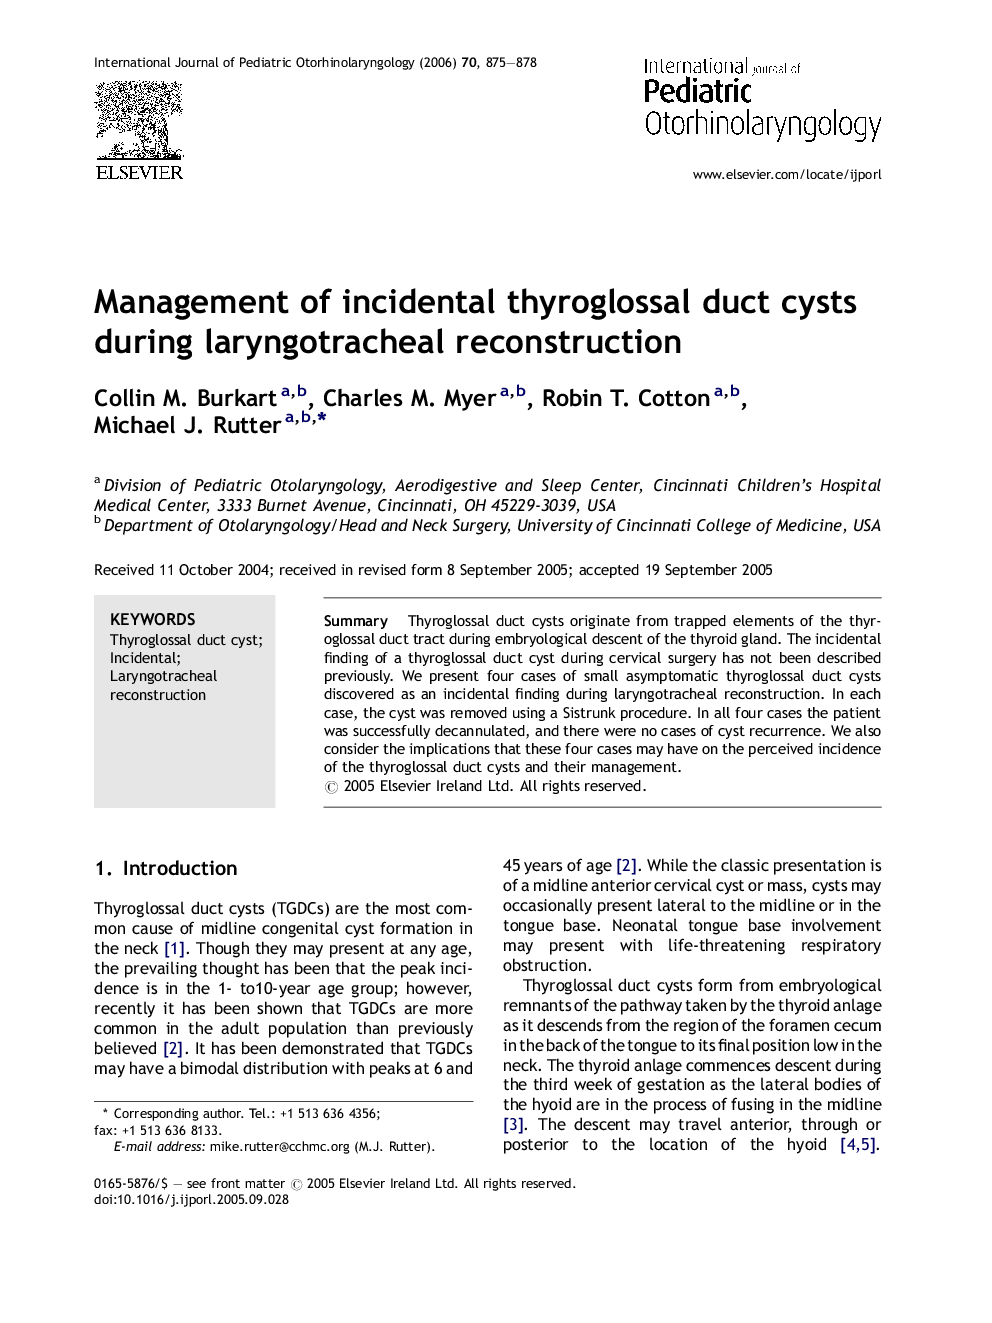 Management of incidental thyroglossal duct cysts during laryngotracheal reconstruction